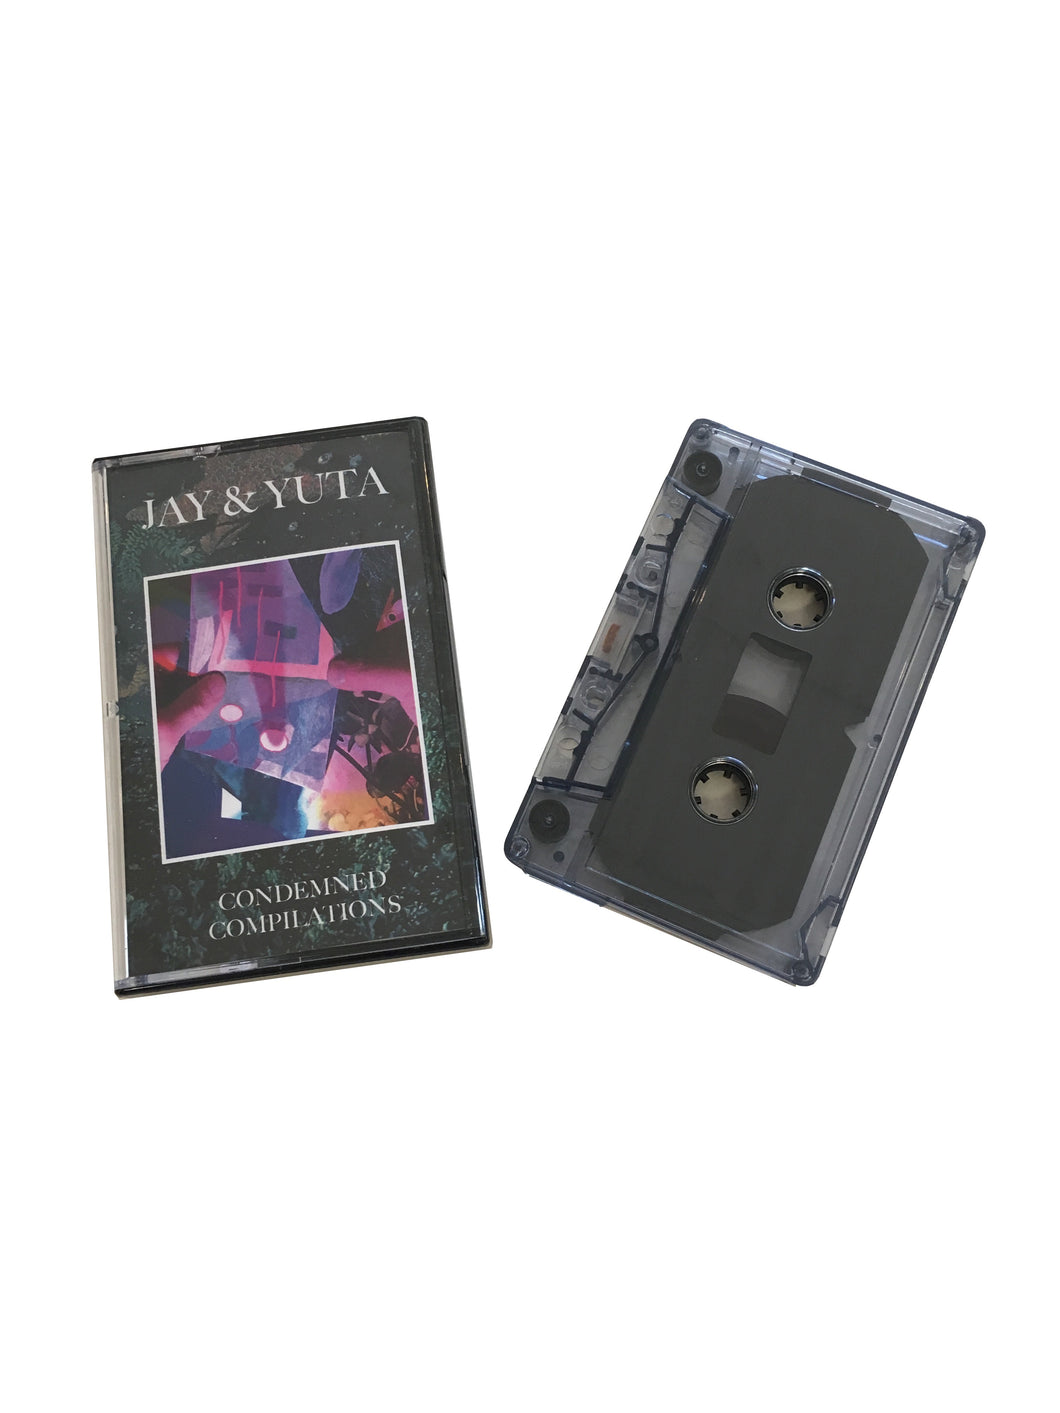 Jay & Yuta: Condemned Compilations cassette